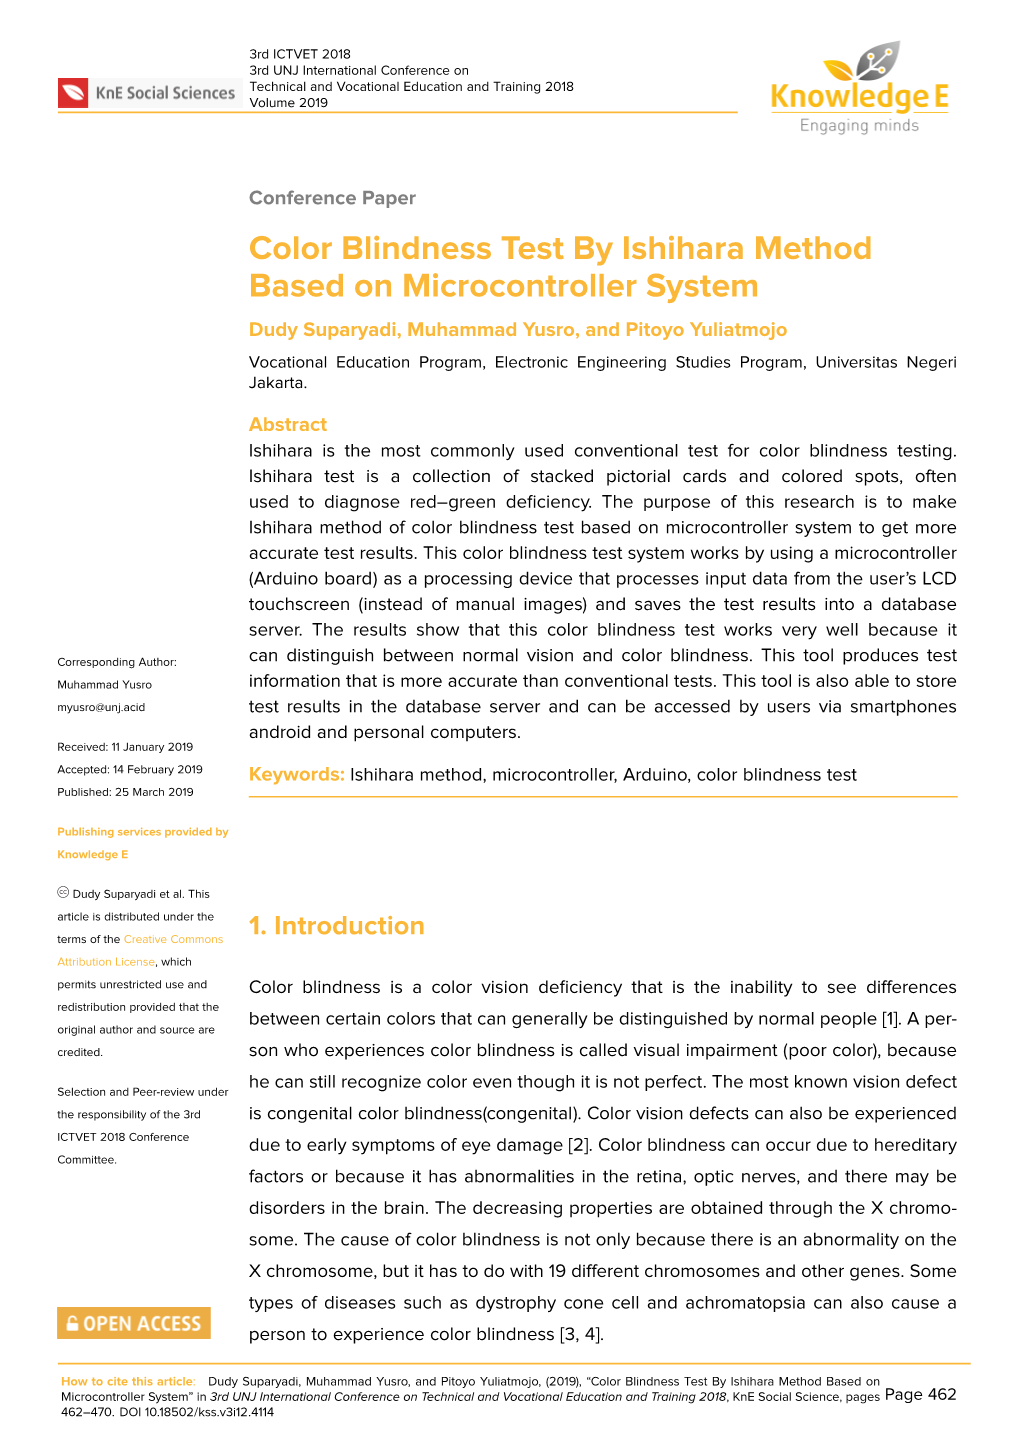 Color Blindness Test by Ishihara Method Based on Microcontroller